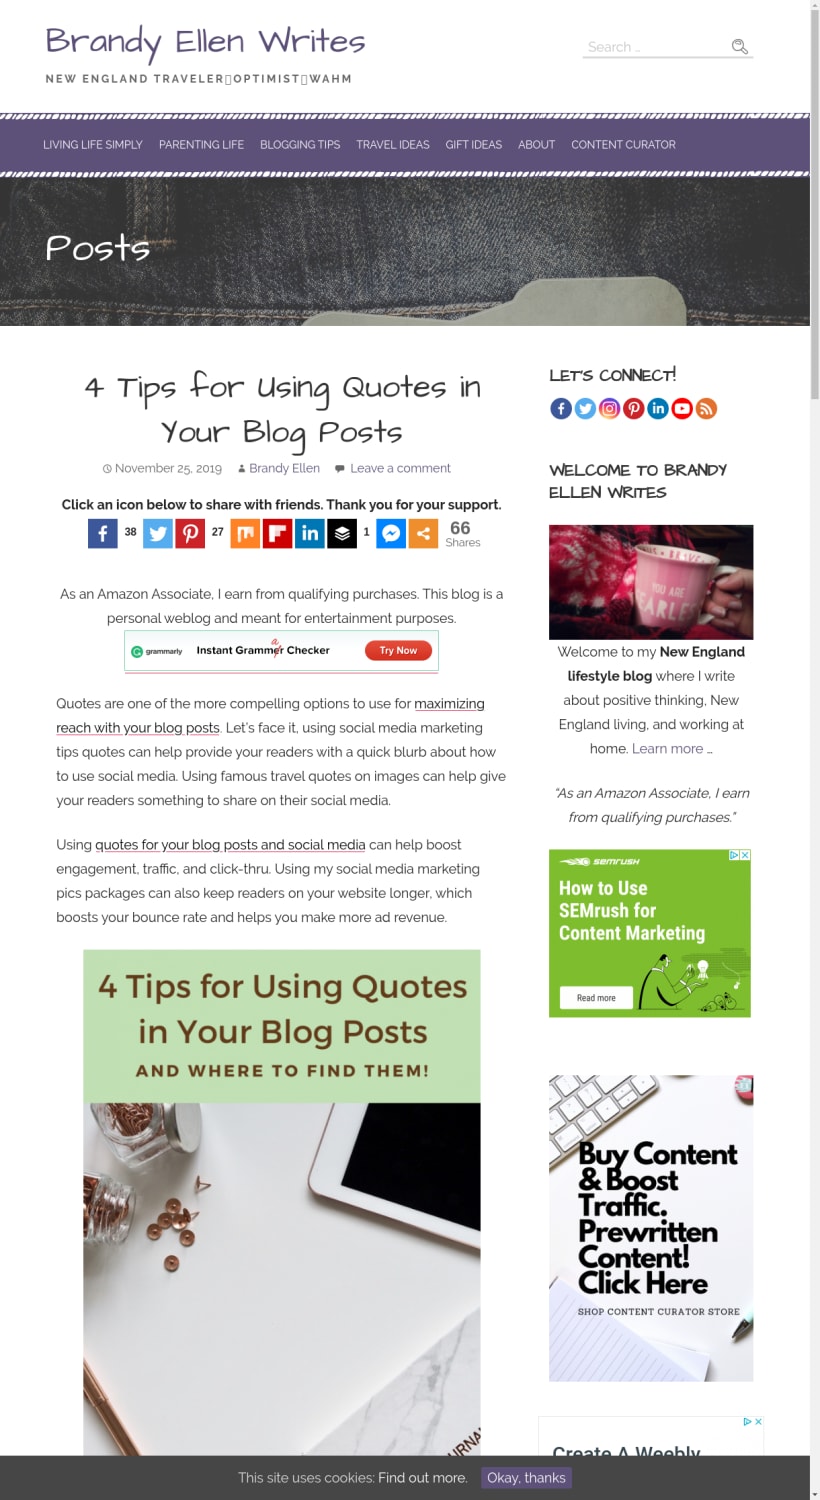 4 Tips for Using Quotes in Your Blog Posts